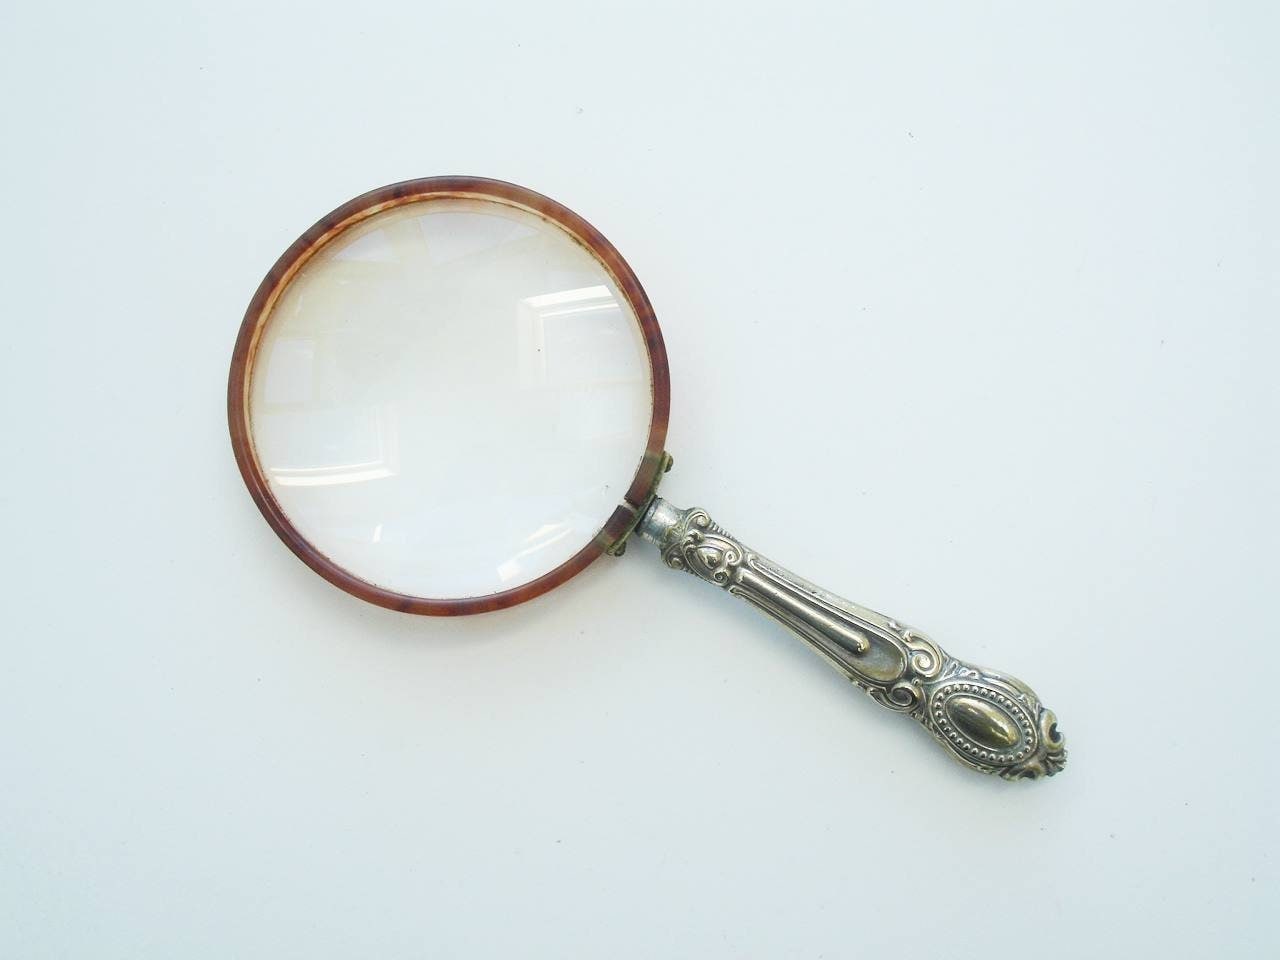 Hands Free Magnifier With Light Magnifier With Light for Crafting 2 in 1  LED Necklace Magnifier Magnifying Glass for Cross Stitch 